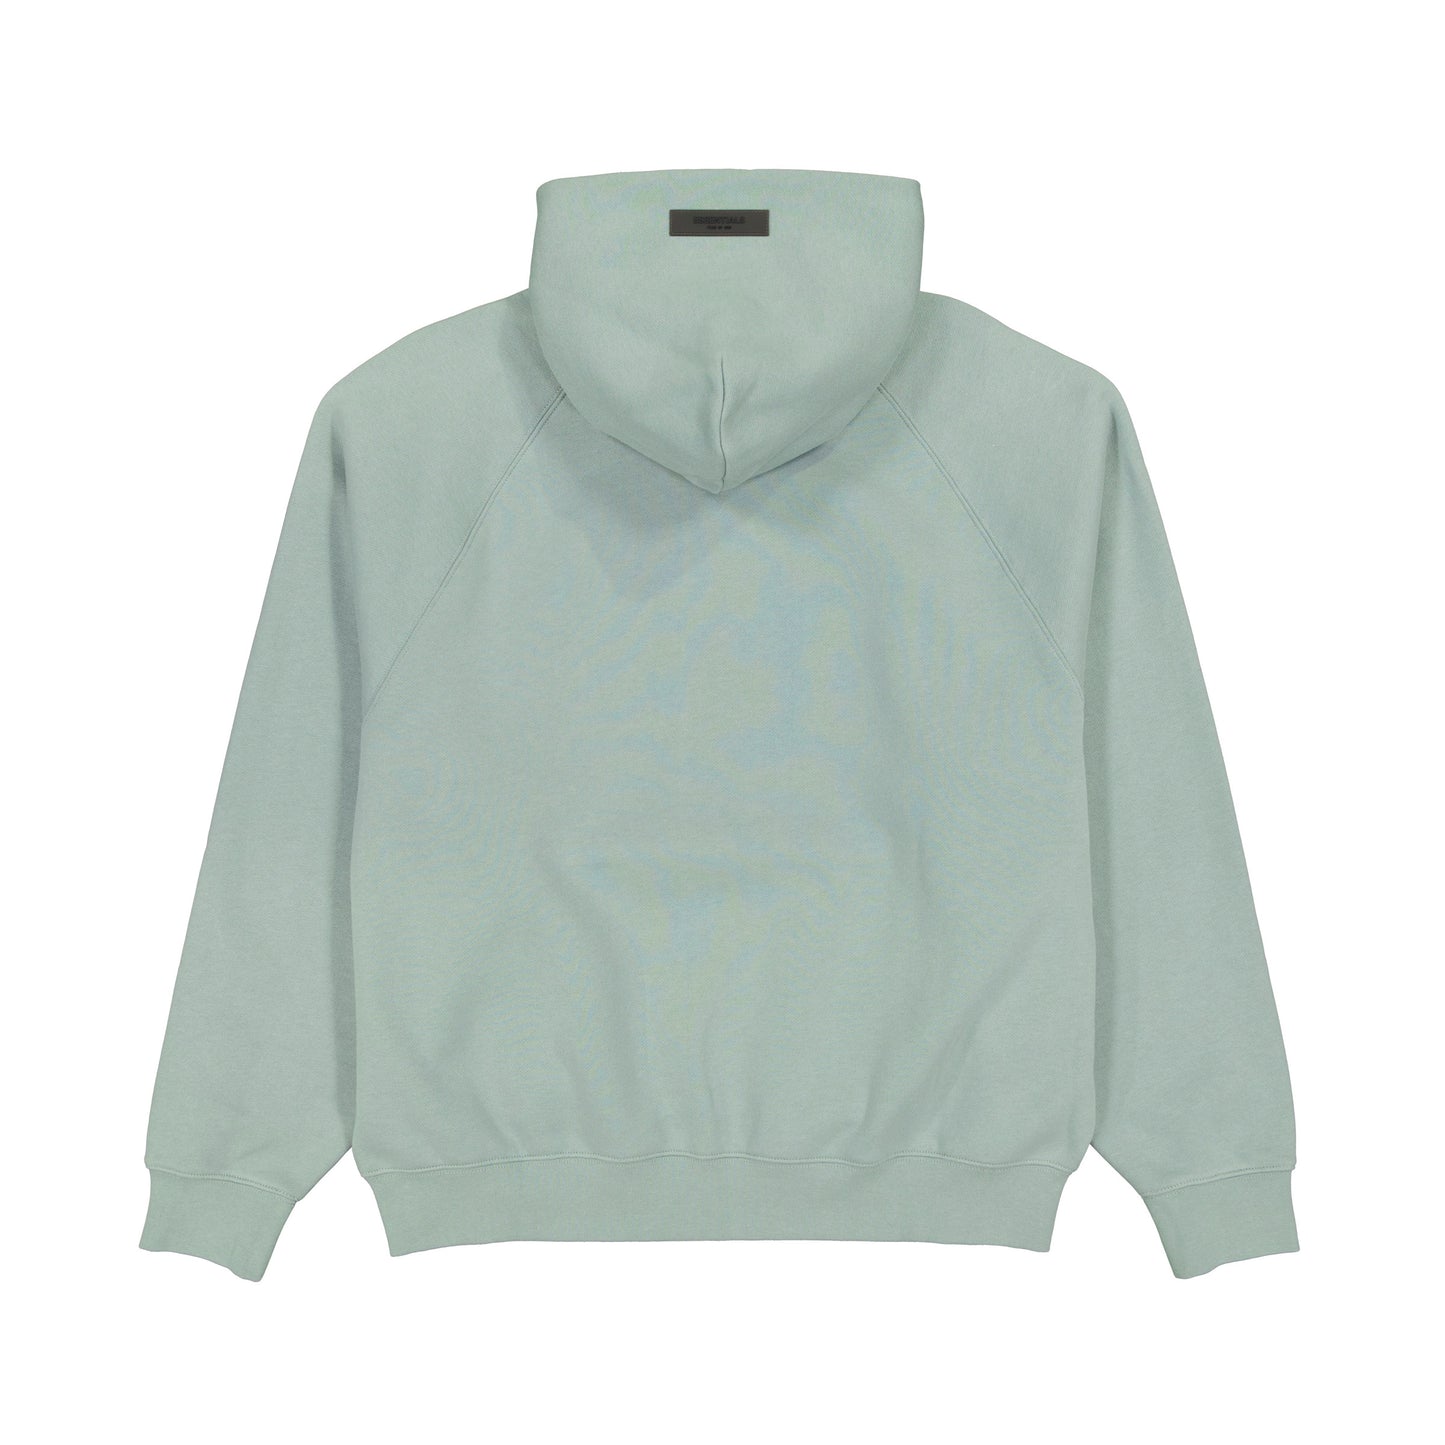 Fear of God Essentials Pullover Hoodie 'Sycamore'